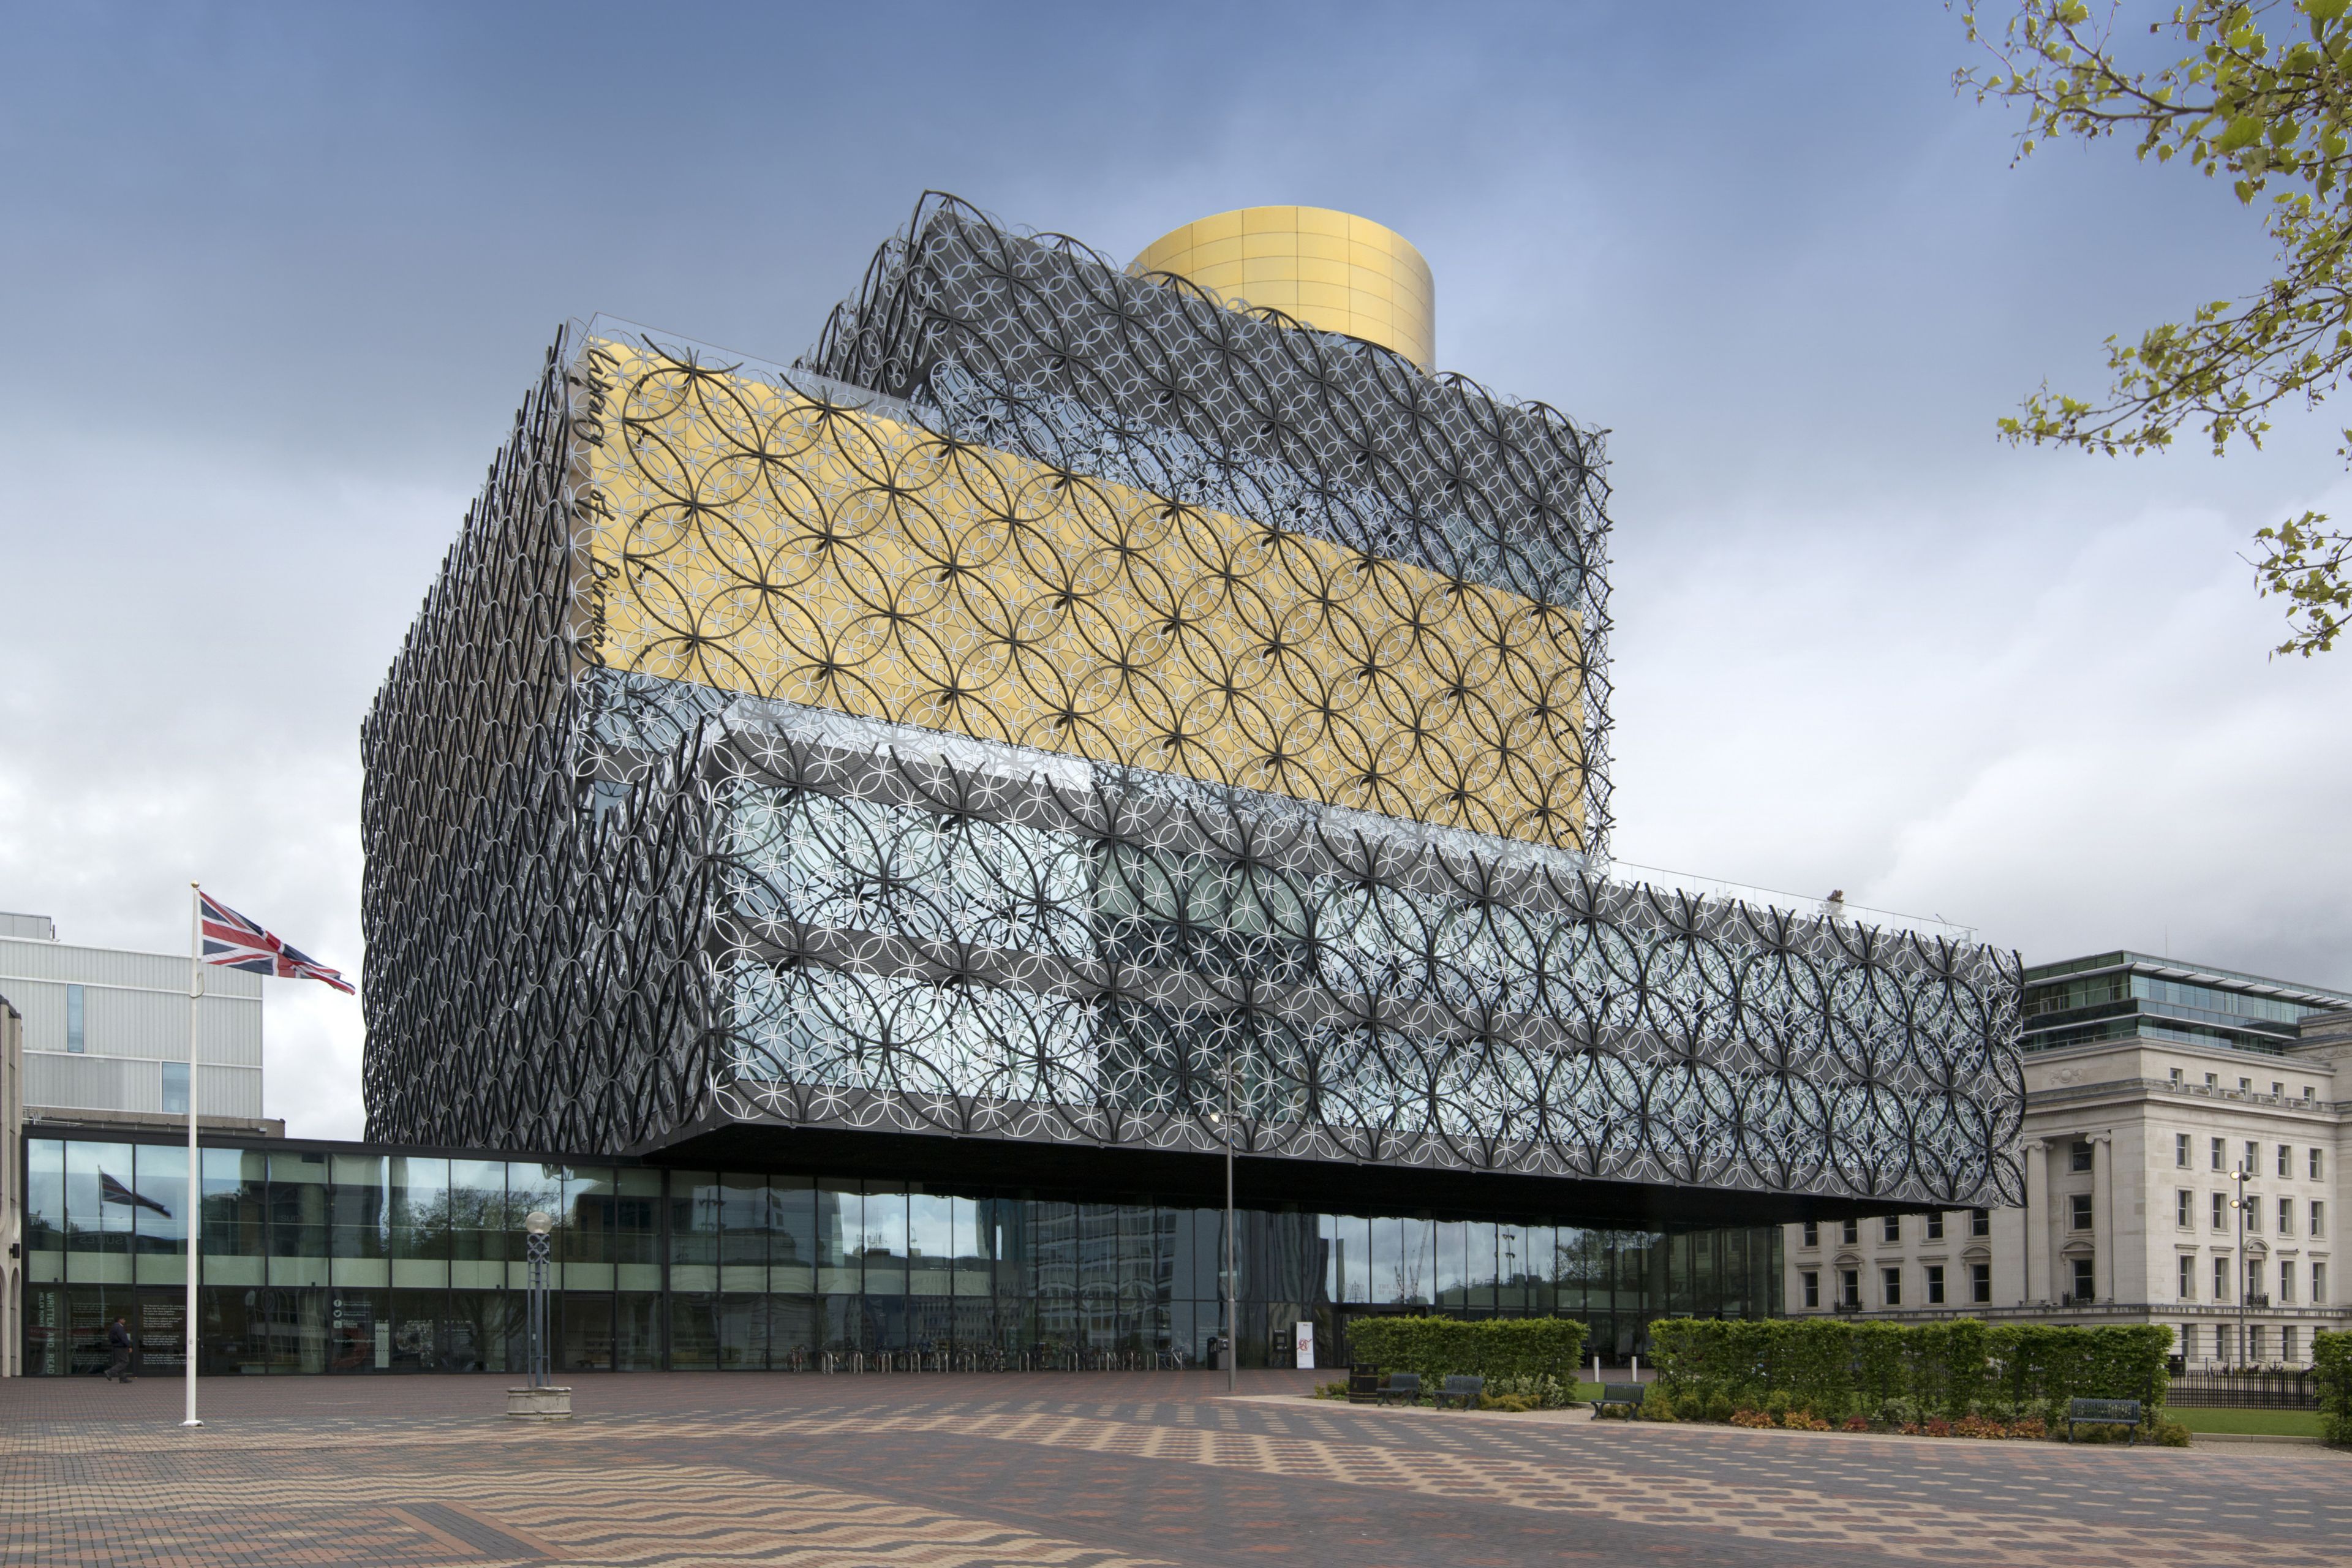 Sika Watertight Concrete System applied at the Library of Birmingham, UK 